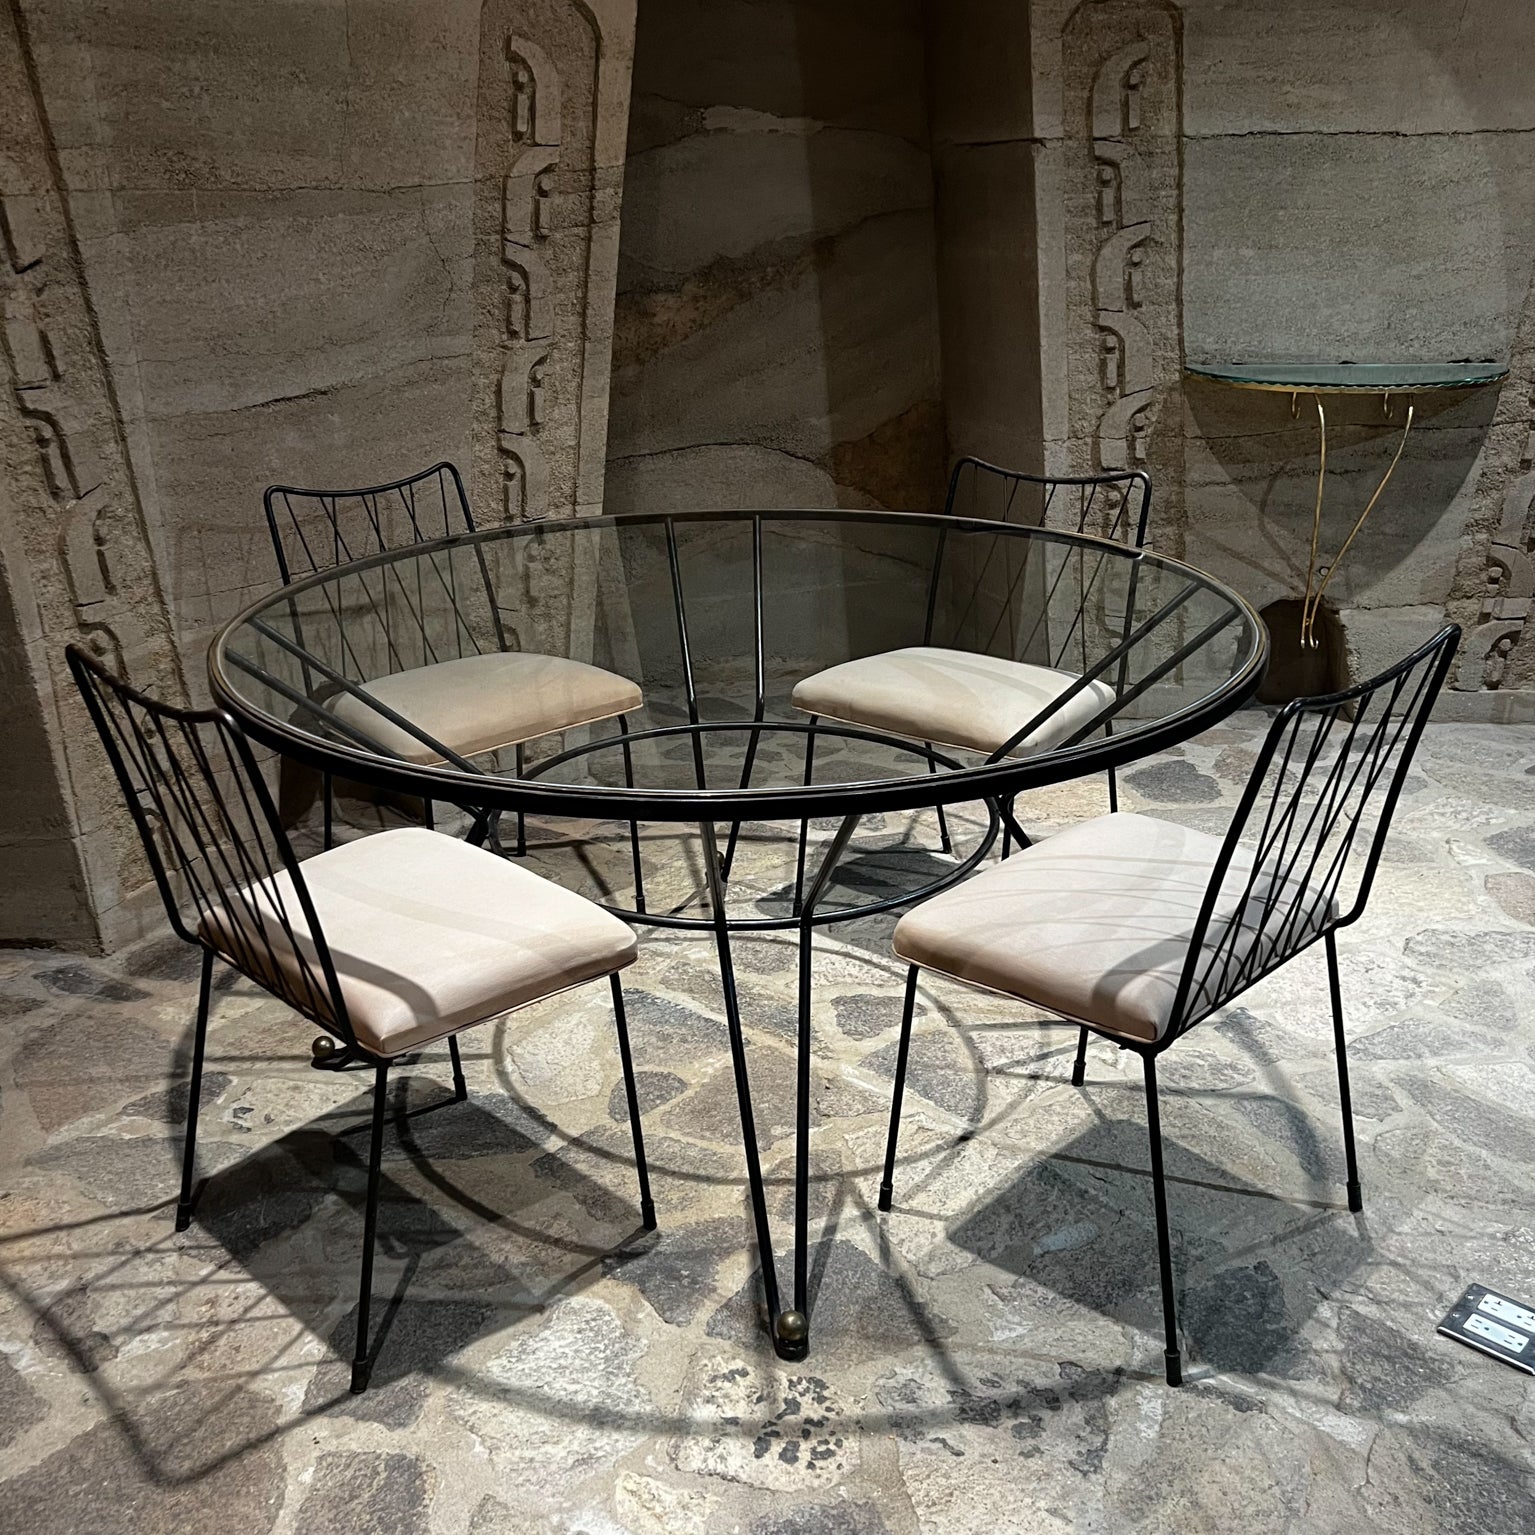 Mexico 1950s Round Dining Table Set
Forged iron and bronze. New glass top 
Table 30 x 59 inches diameter
Set includes 6 dining chairs.
33.25 tall x 20 d x 20.5 w Seat 19.5 h chairs
No label or signature present.
Dining table 4 legs with clean and